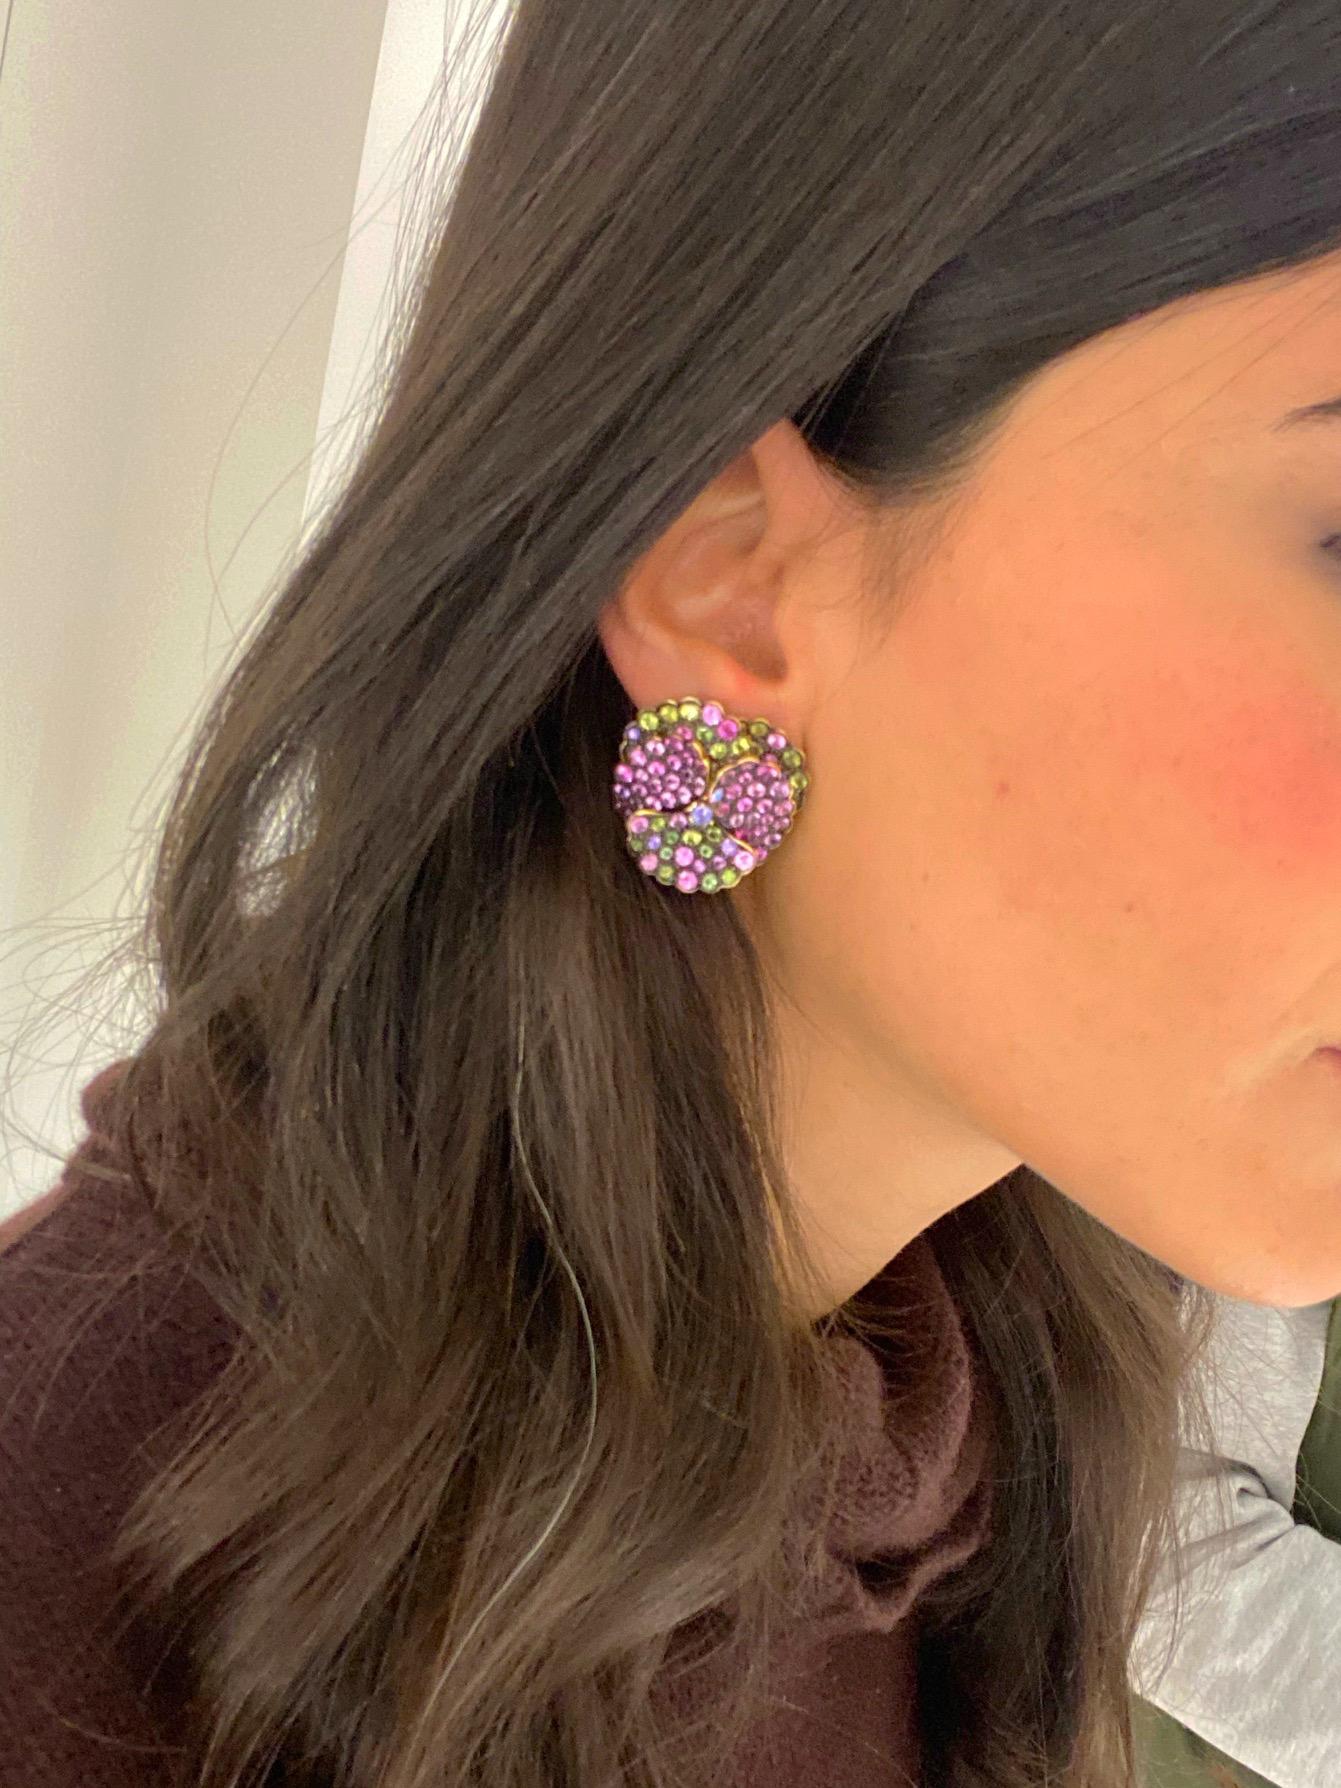 Designed by the famed French designer Jean Vitau for Gemveto. Jean Vitau was a pioneer jewelry designer . He was known for patenting the Gemlok setting ,a secure and snag proof way of setting diamonds and colored stones.

These lovely pansy earrings